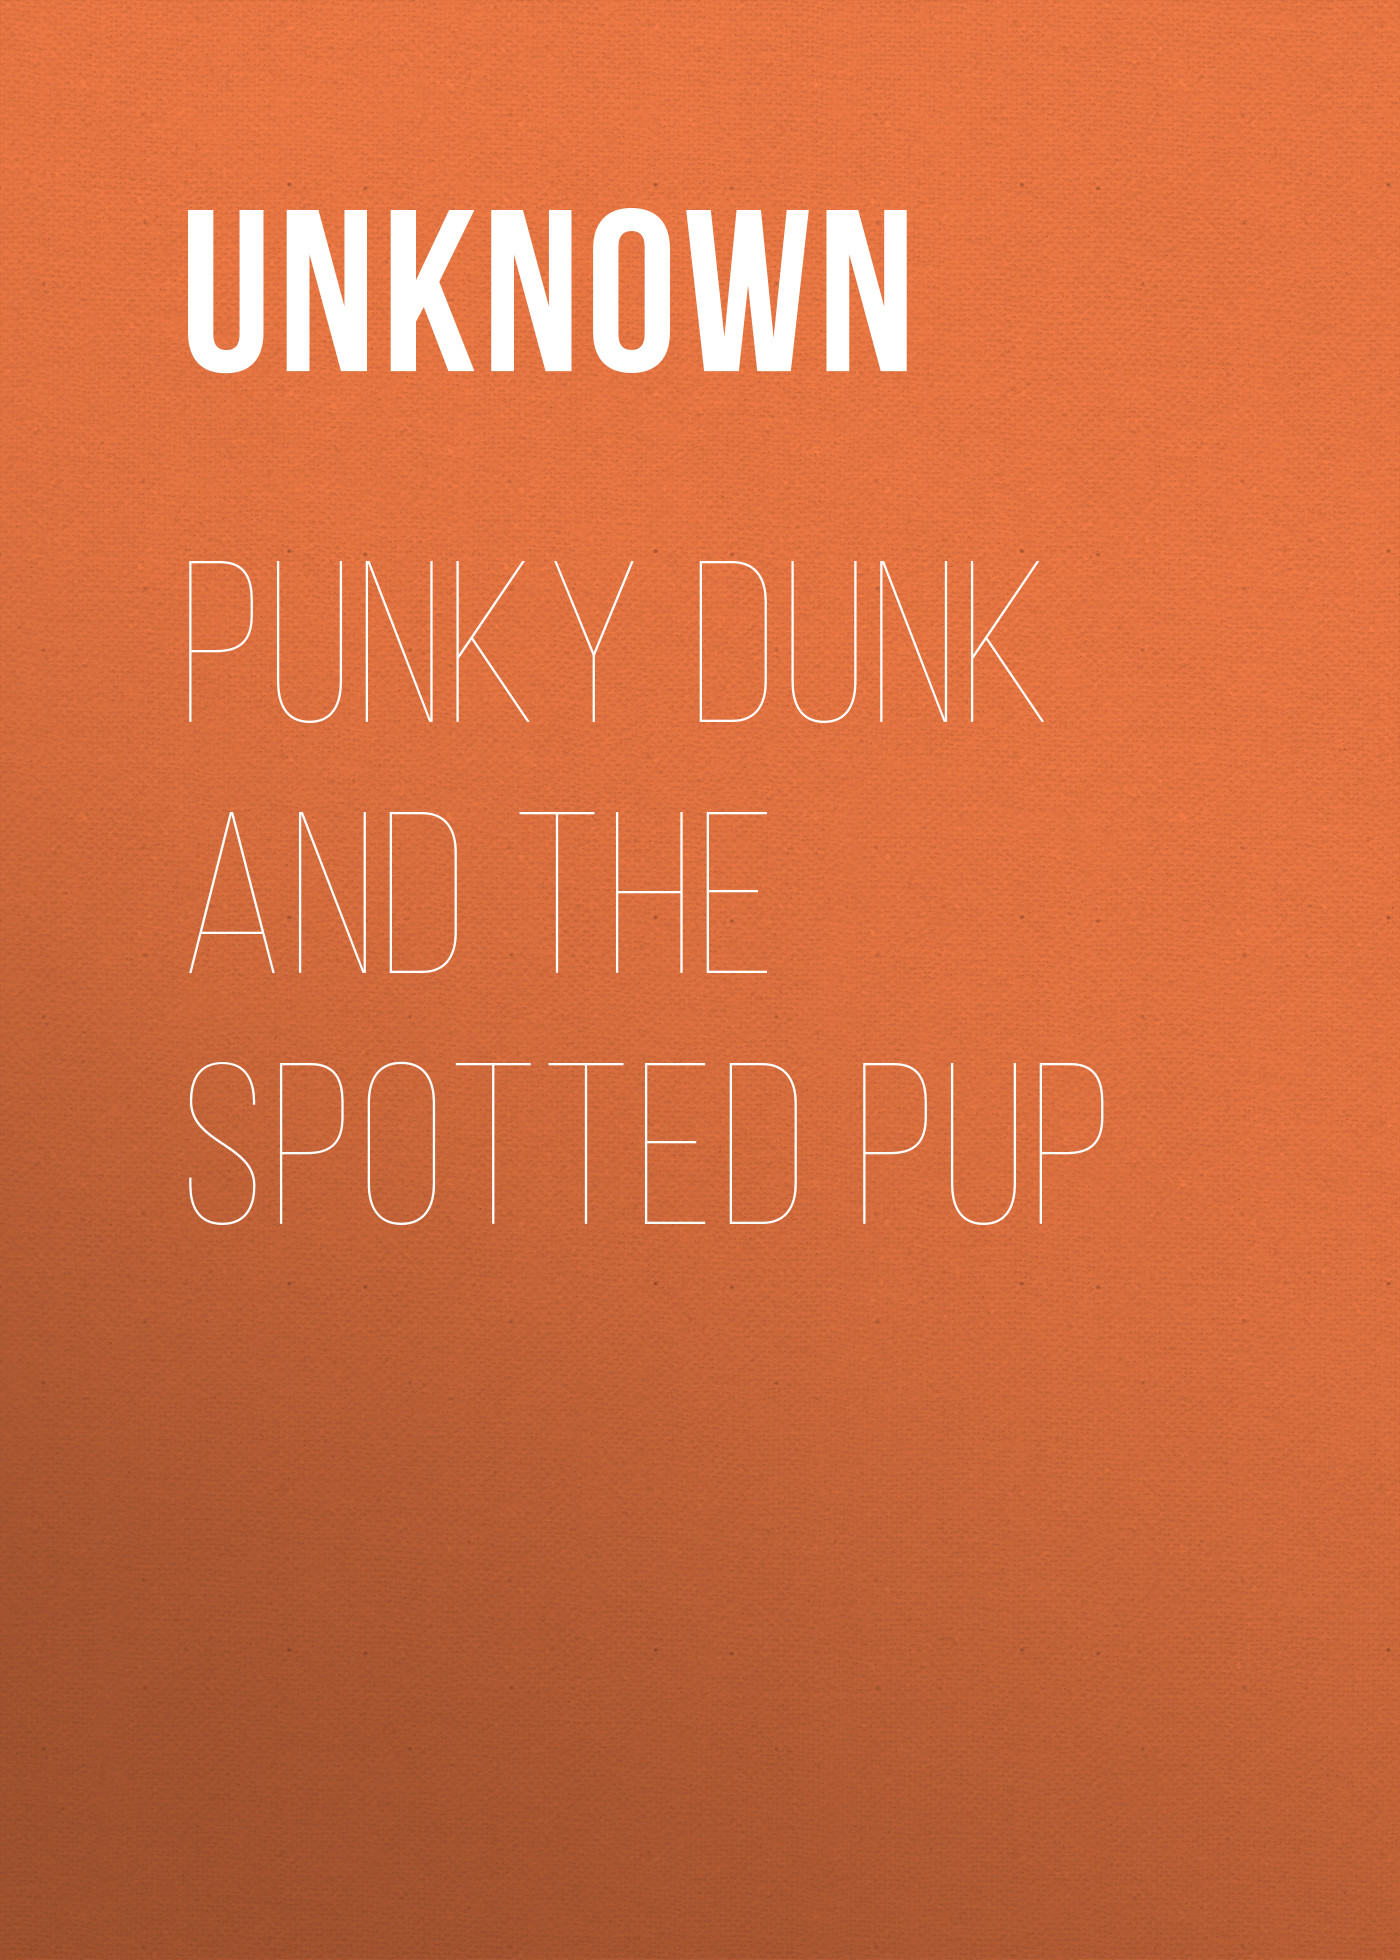 Unknown Punky Dunk and the Spotted Pup